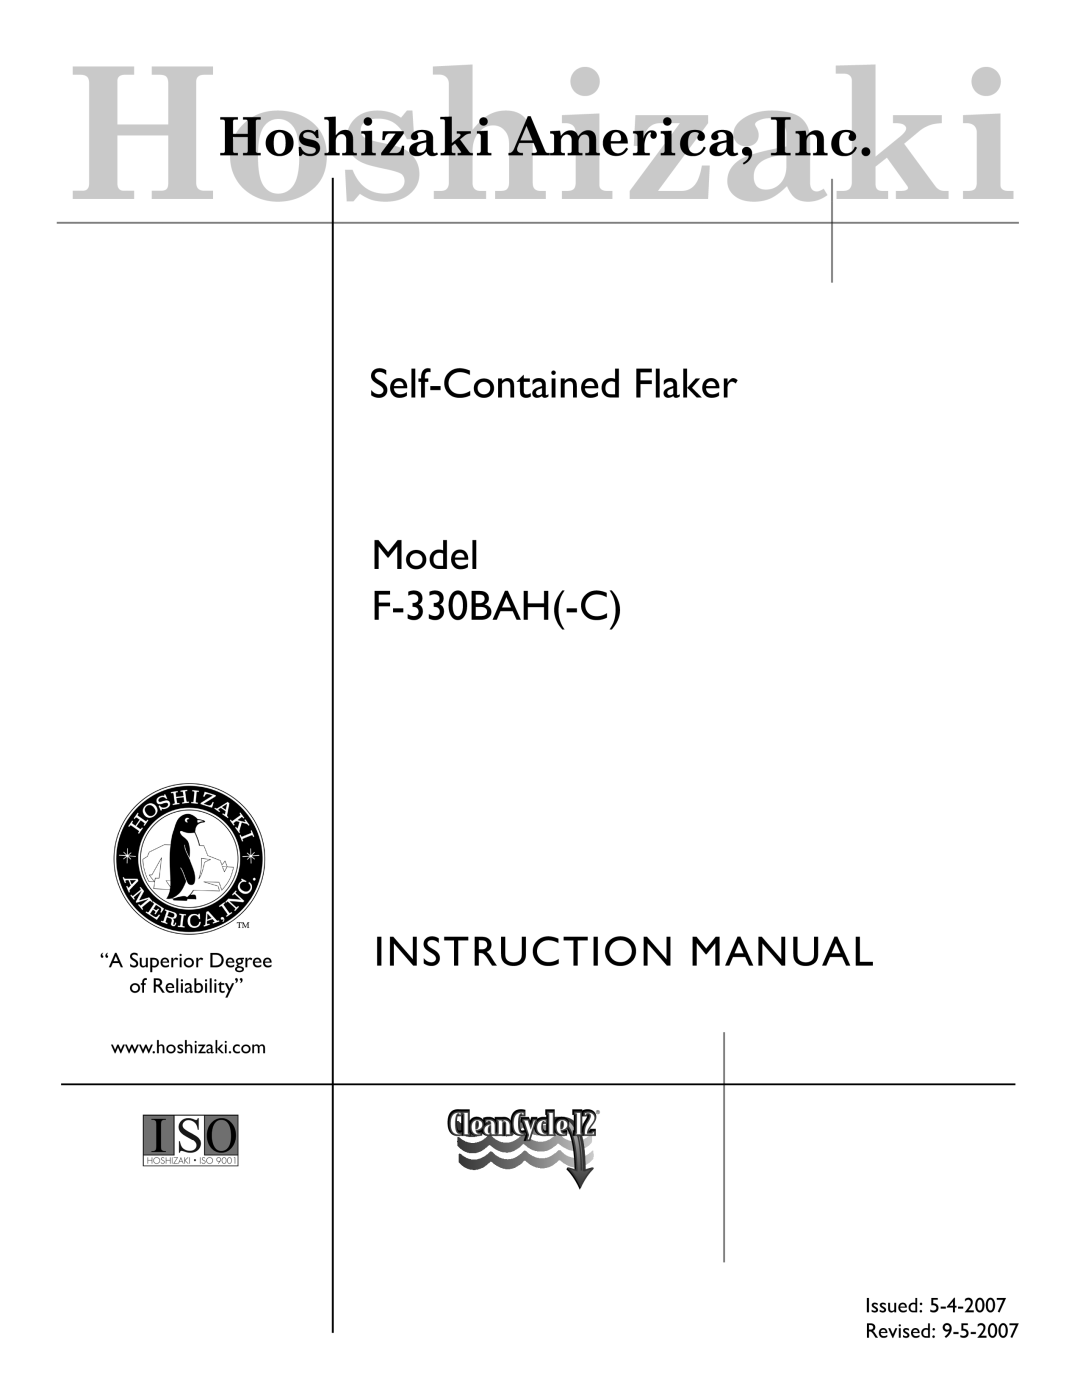 Hoshizaki F-330BAH(-C) instruction manual Self-ContainedFlaker Model F-330BAH-C, “A Superior Degree of Reliability” 